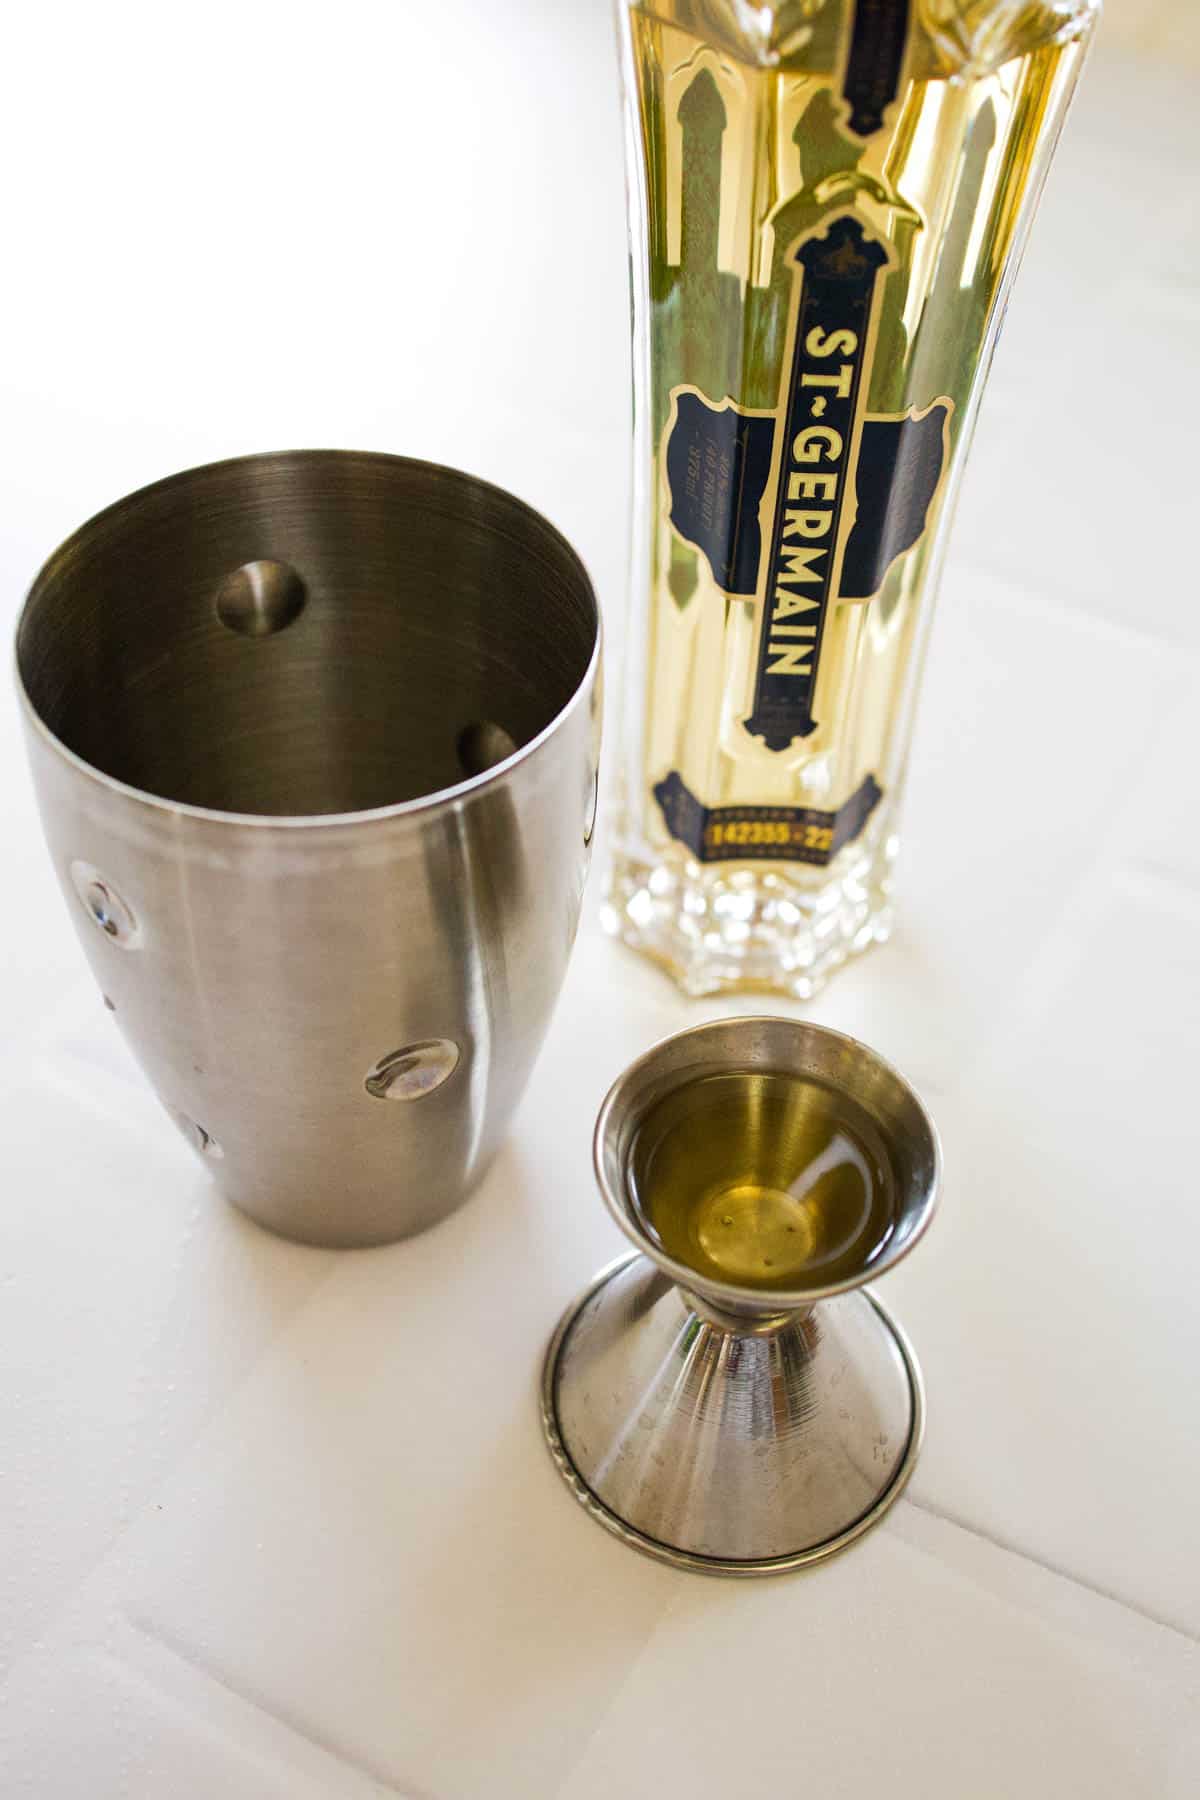 Cocktail shaker and jigger next to a bottle of St Germain.